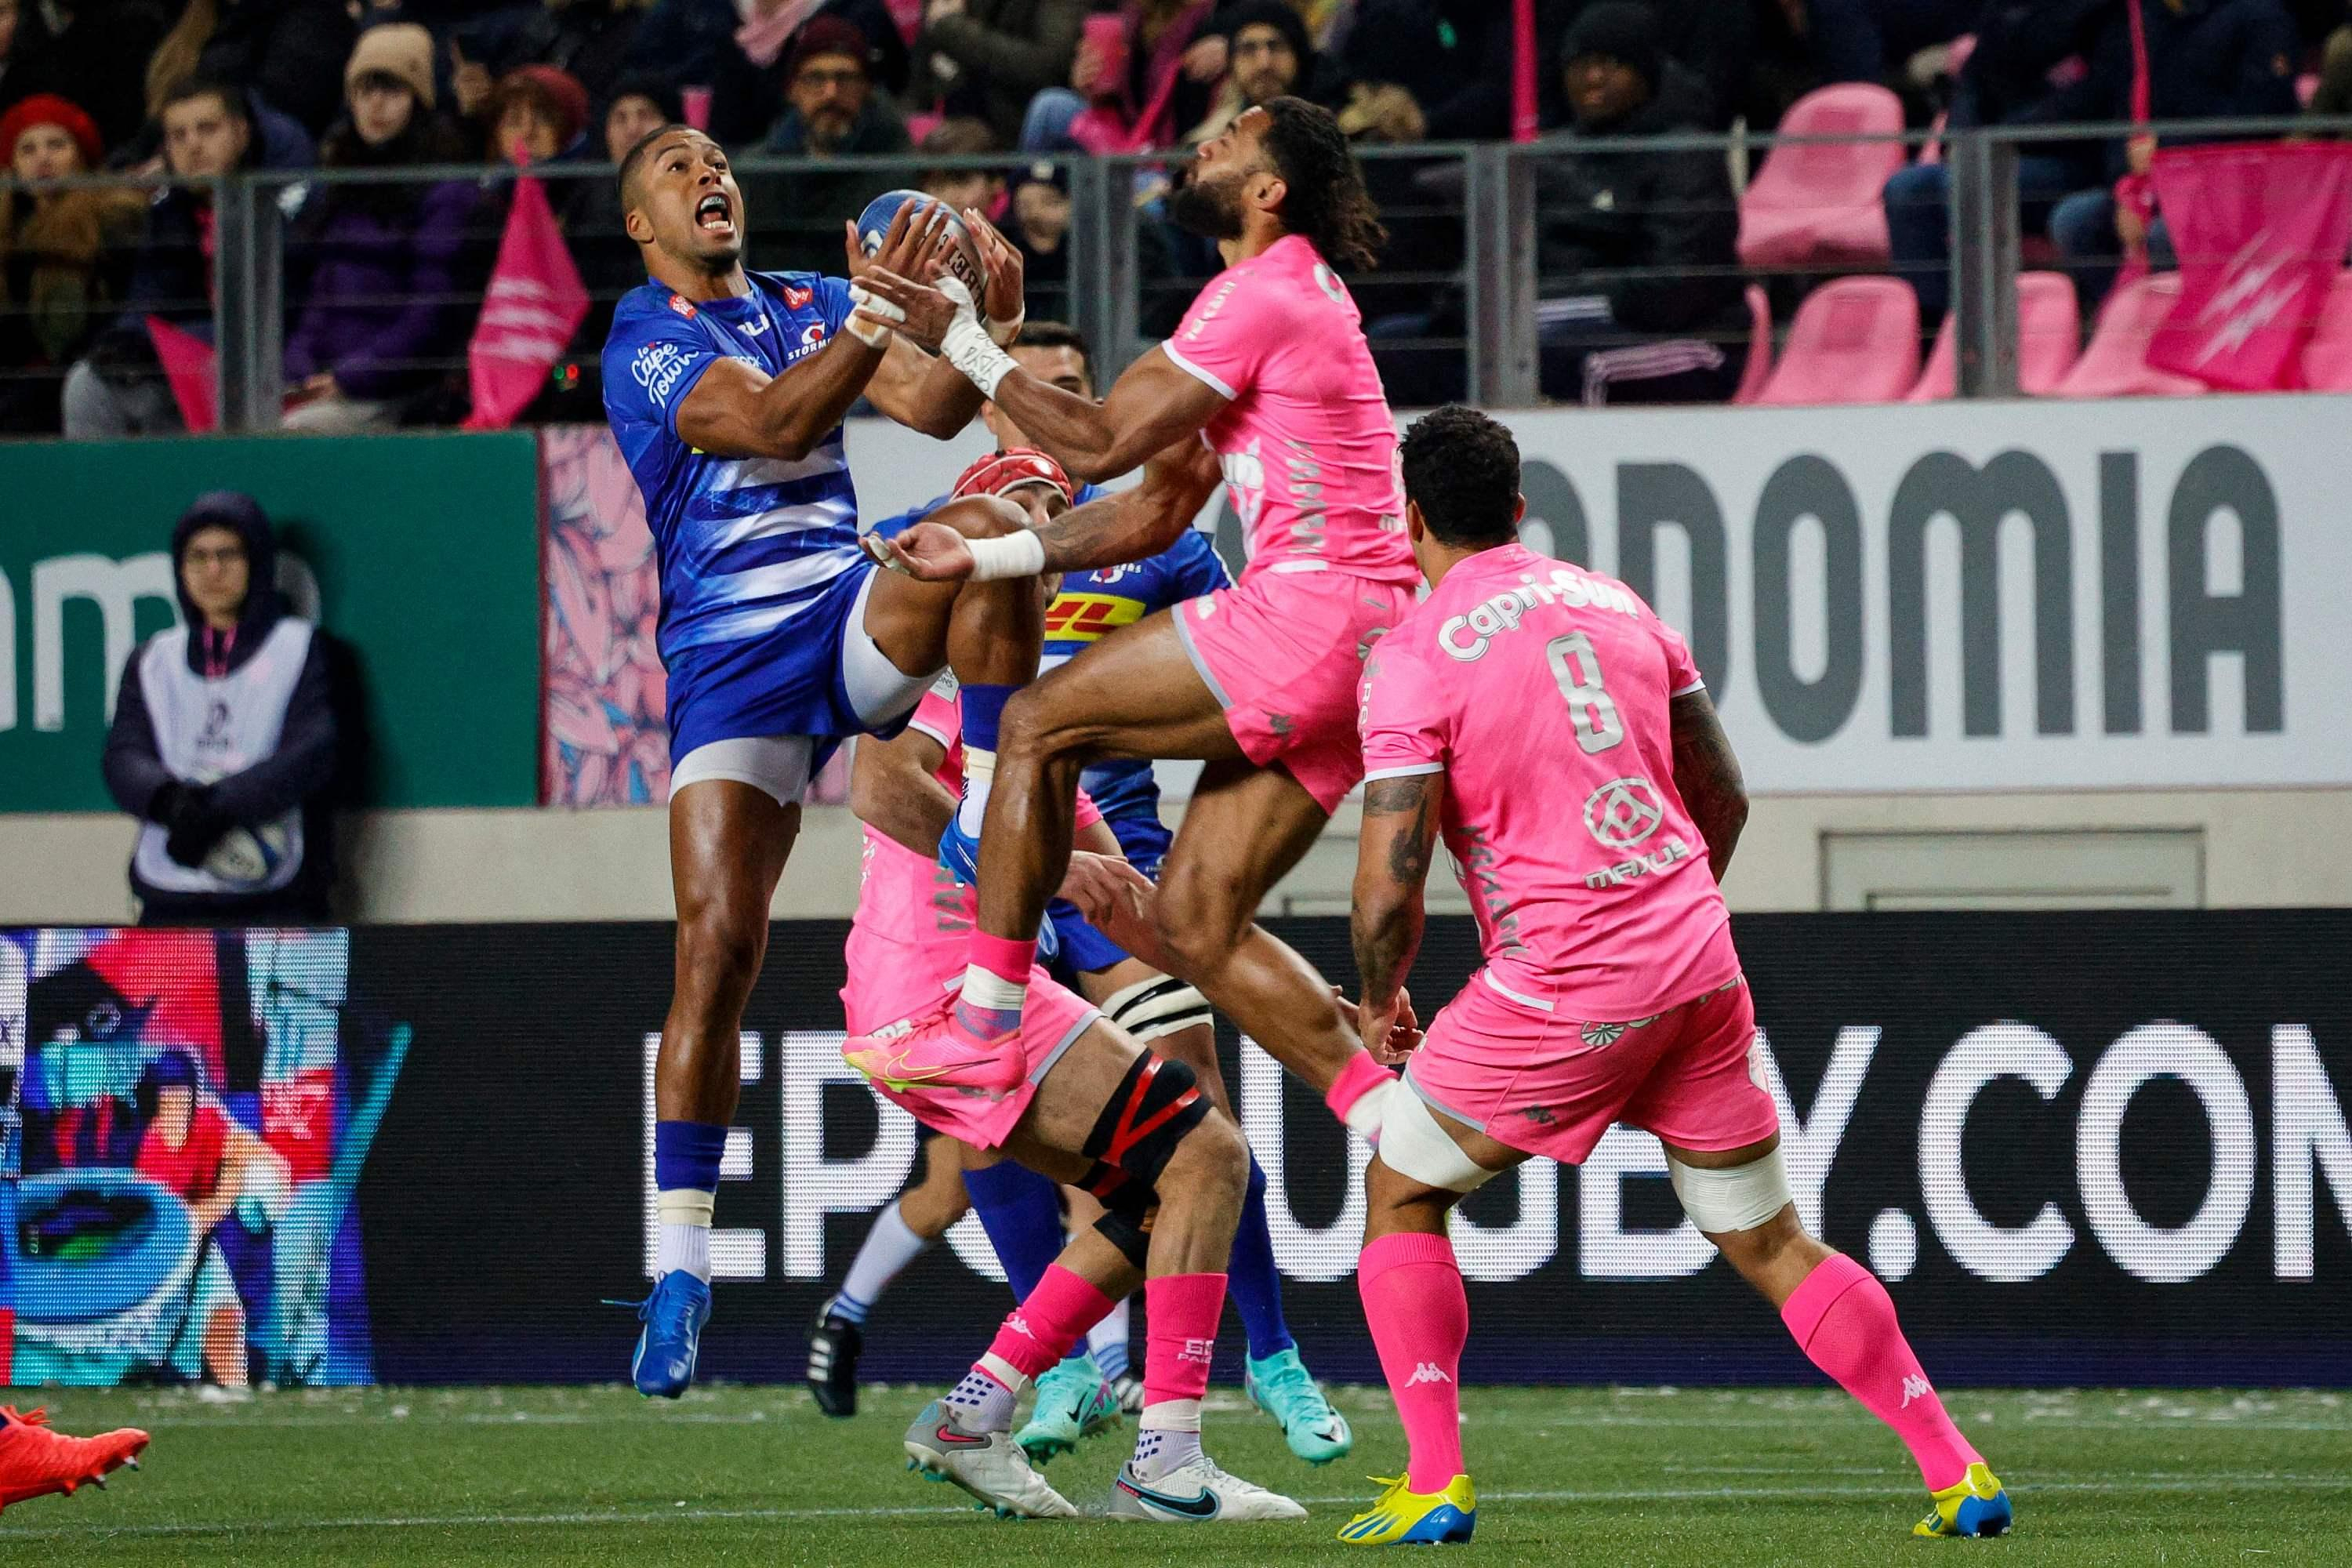 Champions Cup: Stade Français finishes without the slightest victory